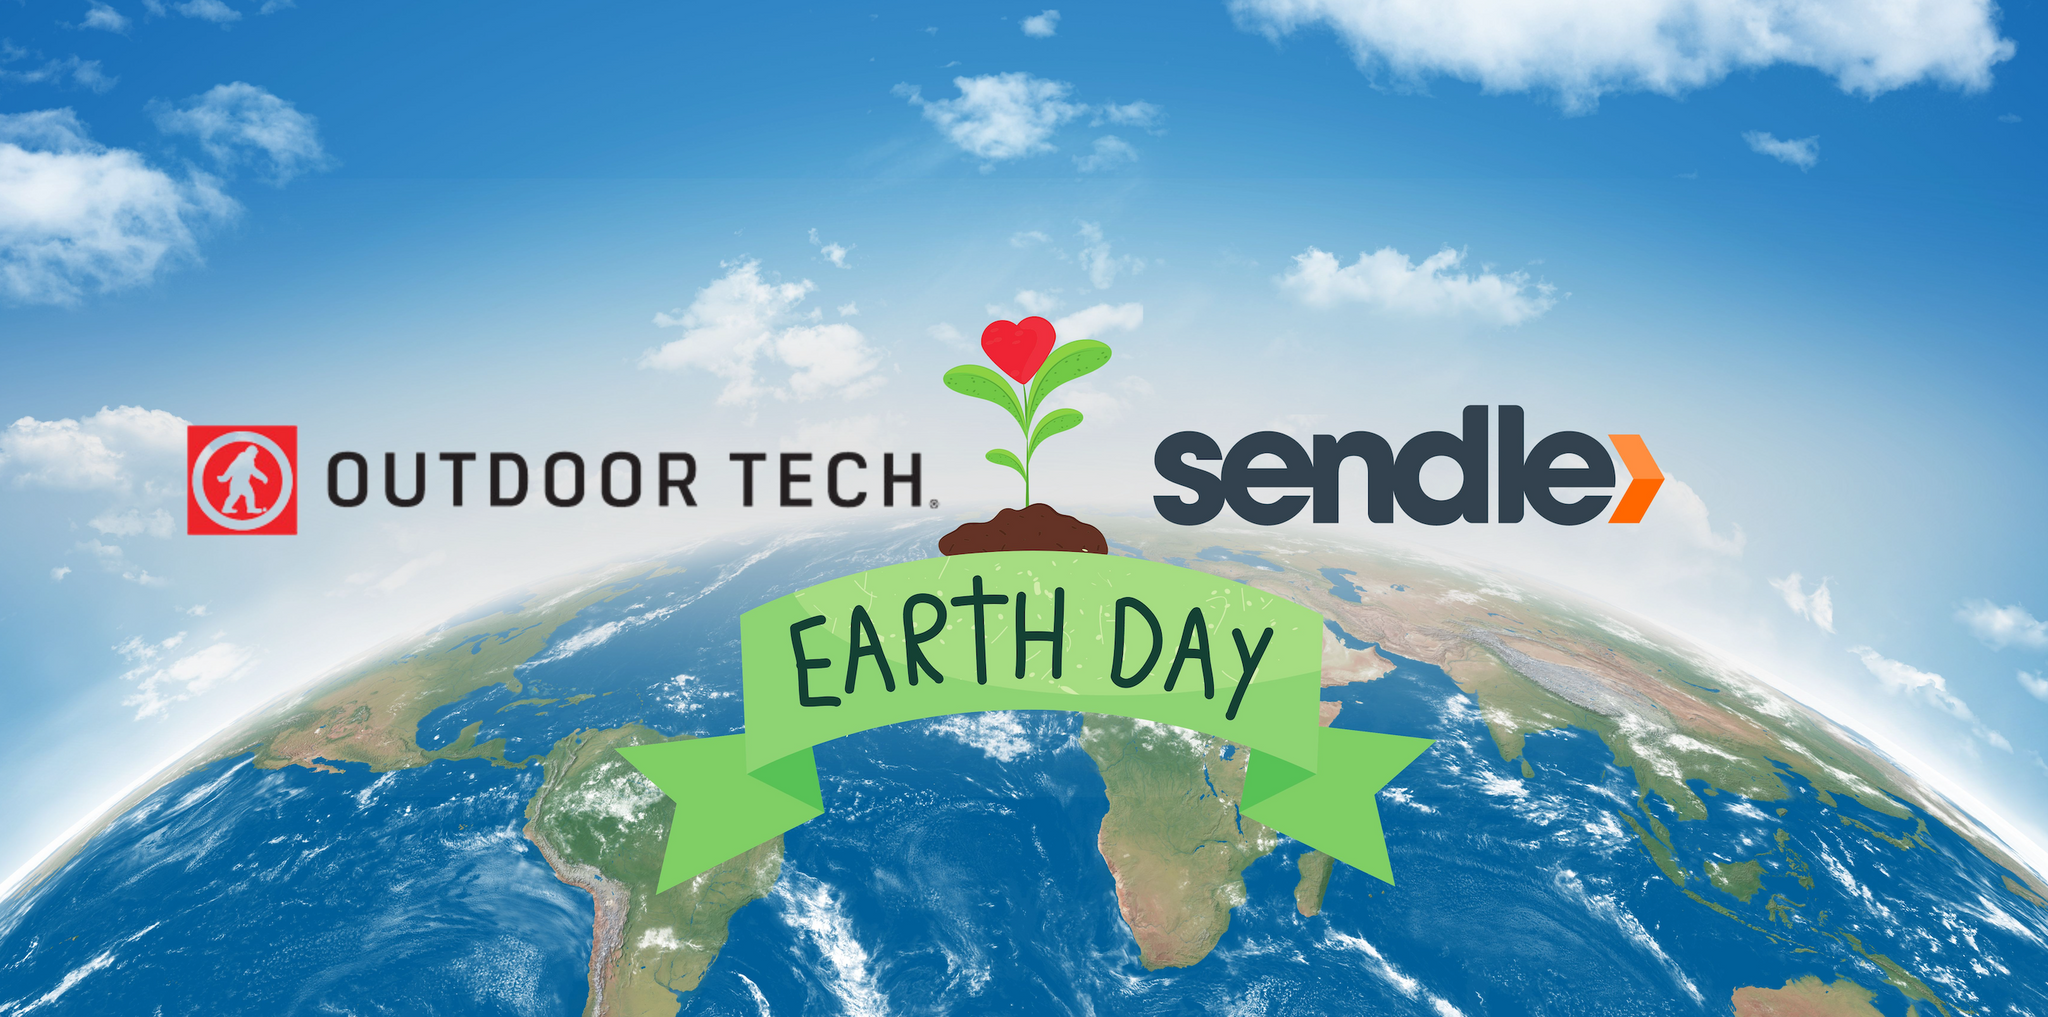 Celebrating Earth Day: Outdoor Tech’s Commitment to Sustainability Through a Partnership with Sendle